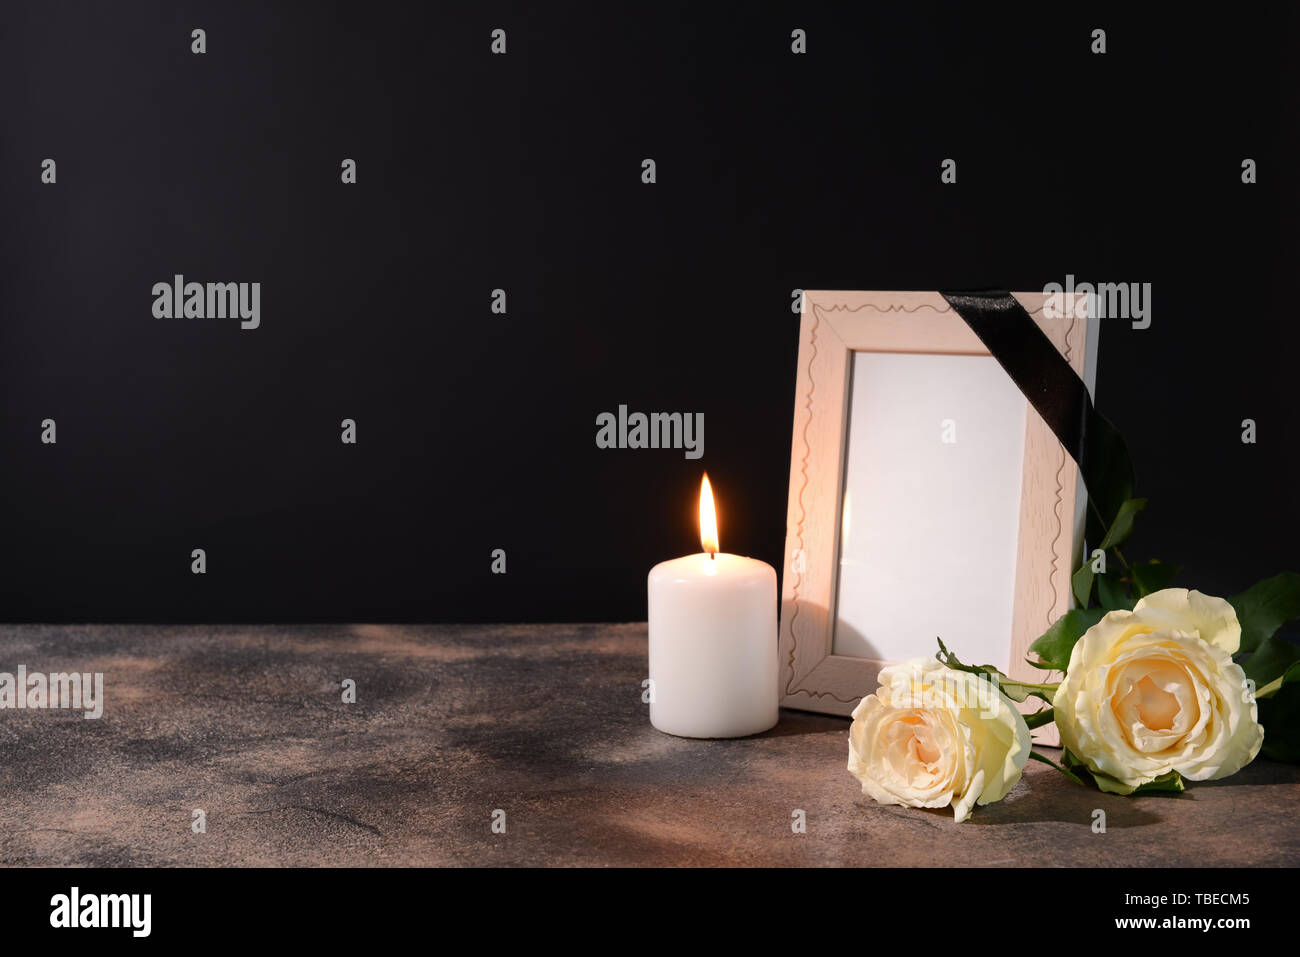 Blank funeral frame, candle and flowers on table against black background  Stock Photo - Alamy